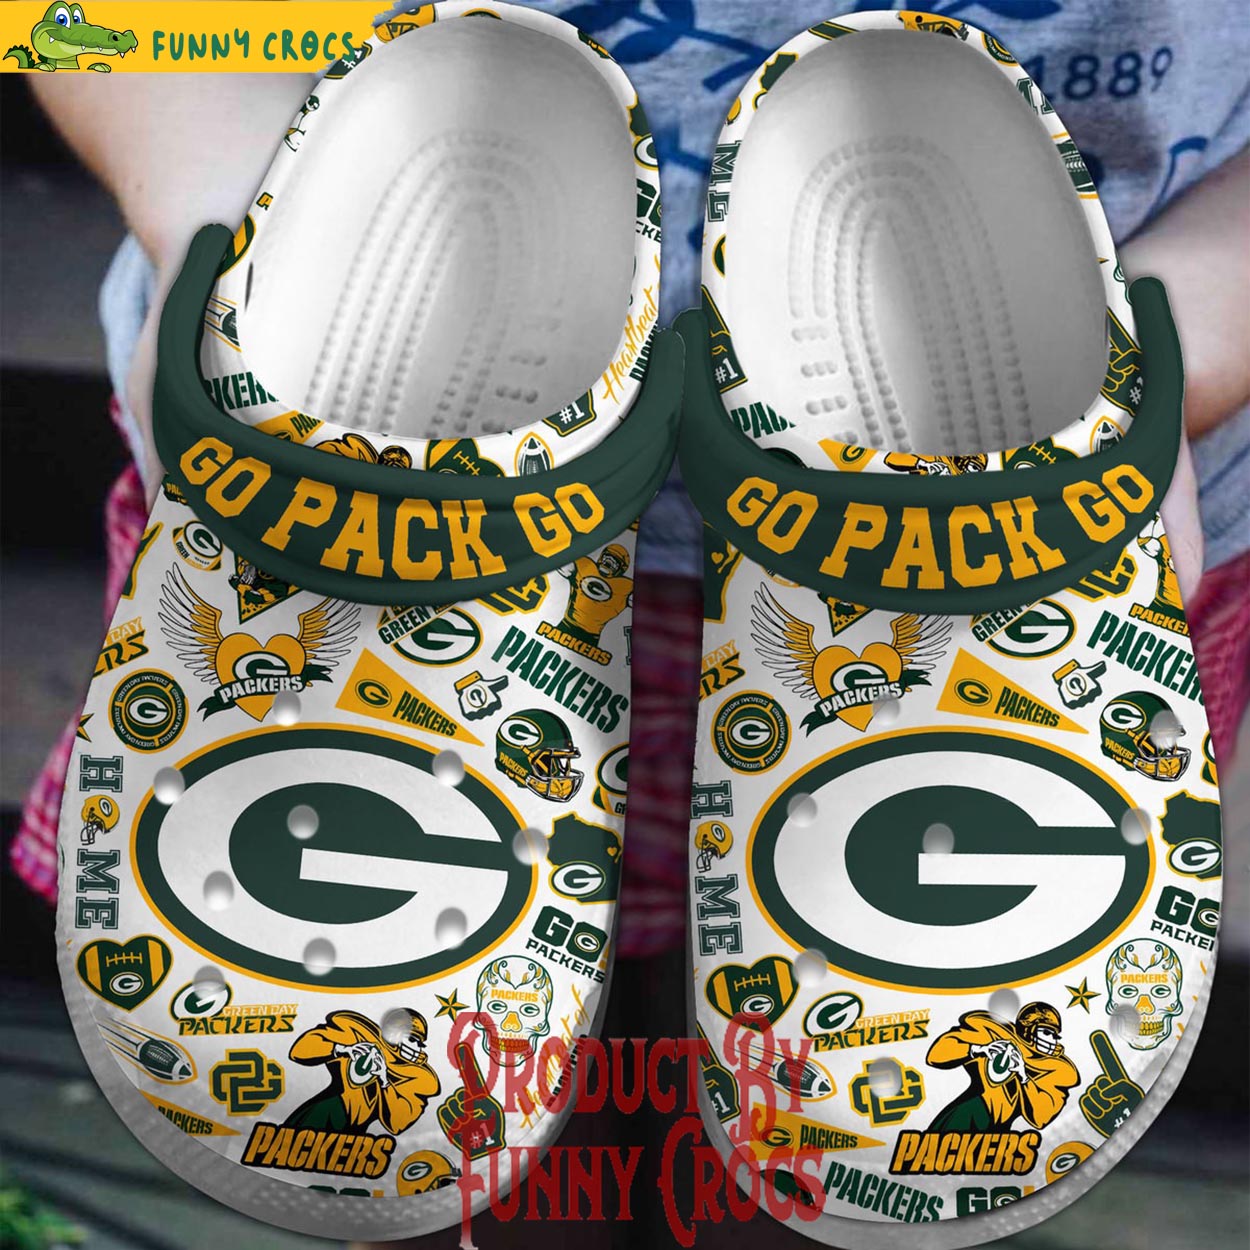 Green Bay Packers Go Pack Go Crocs Shoes - Discover Comfort And Style ...